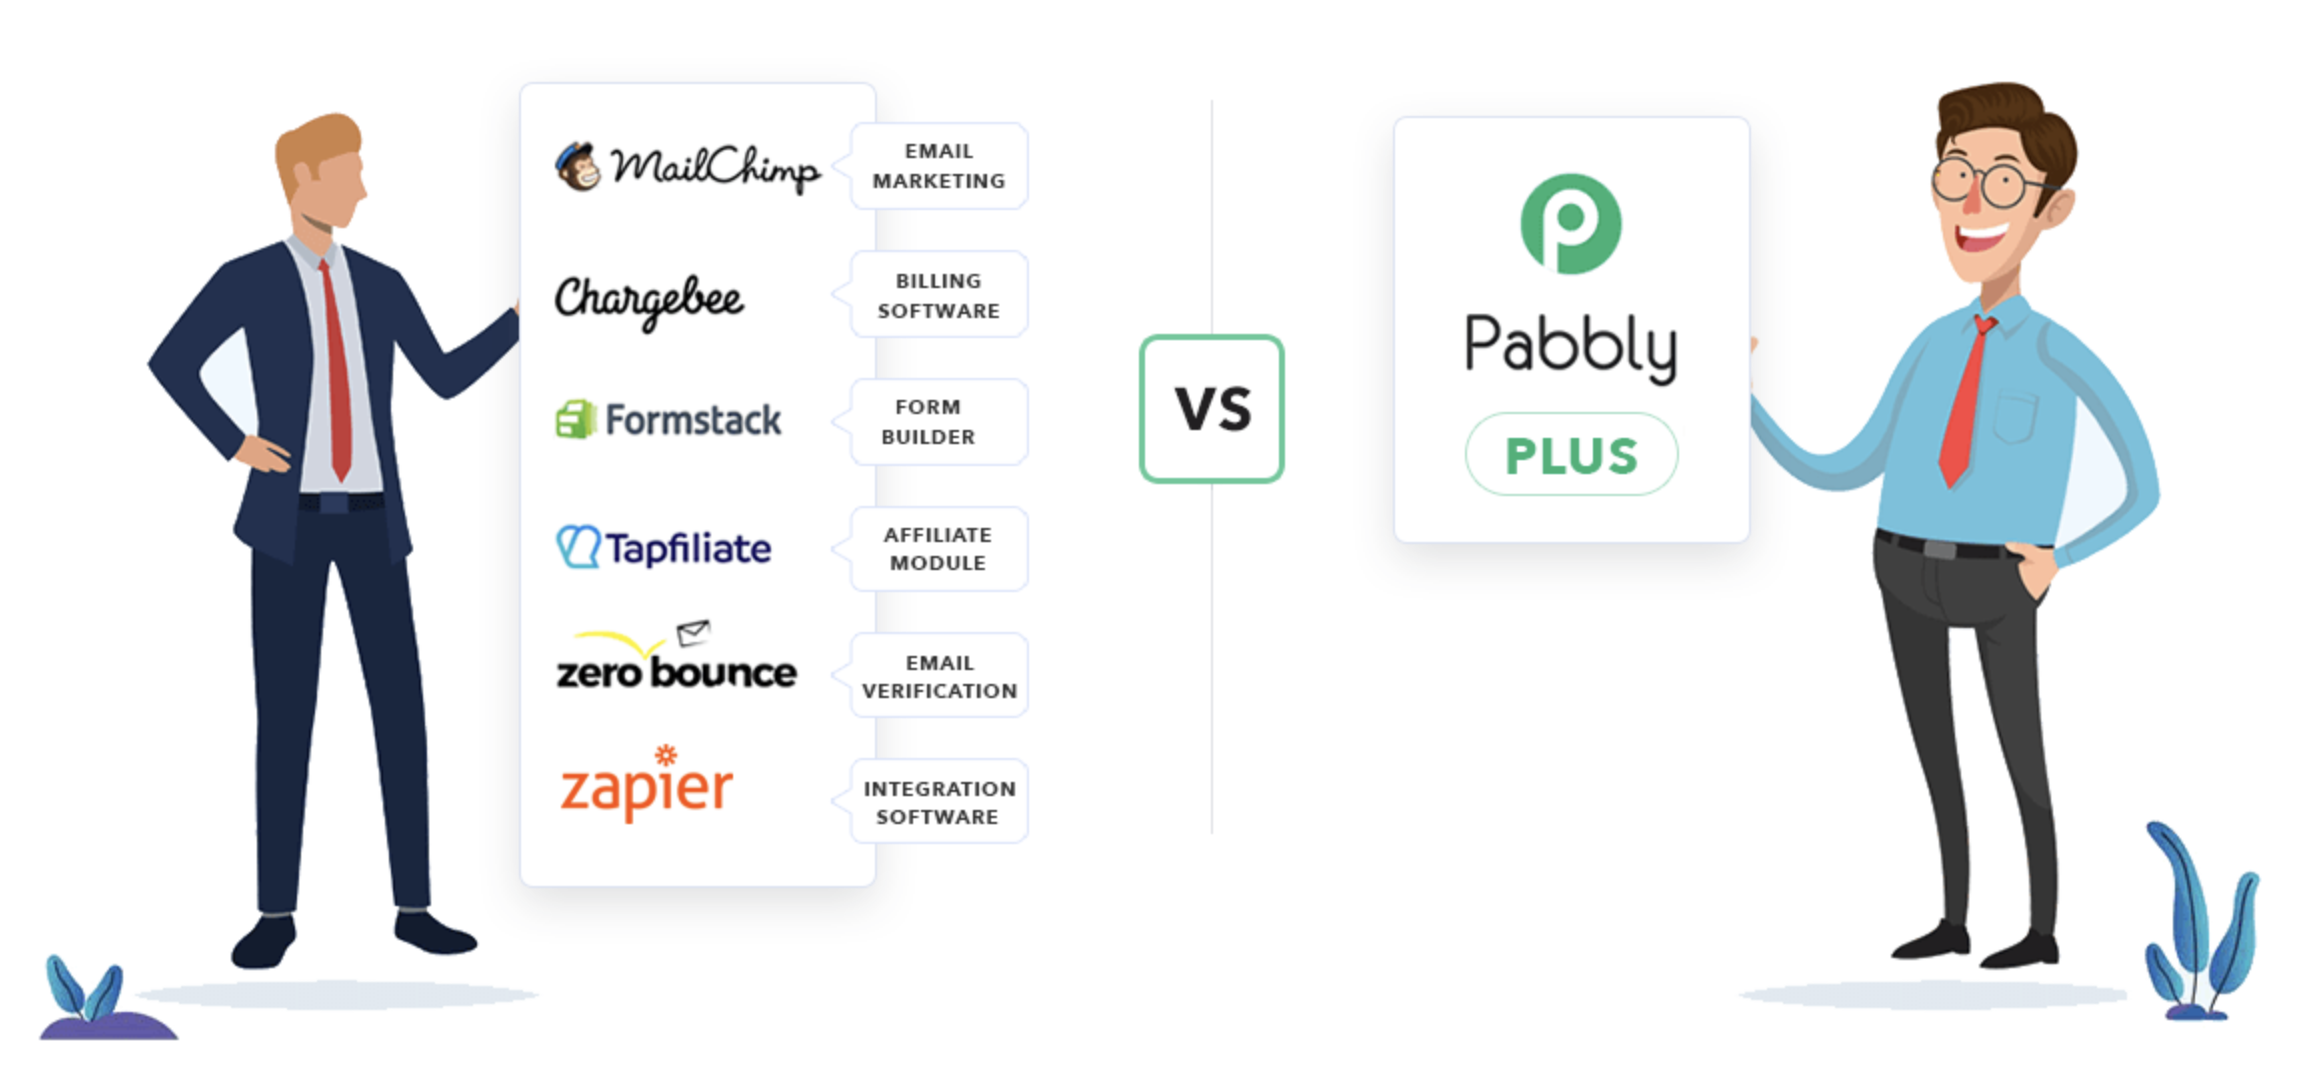 Pabbly Connect Lifetime Deal